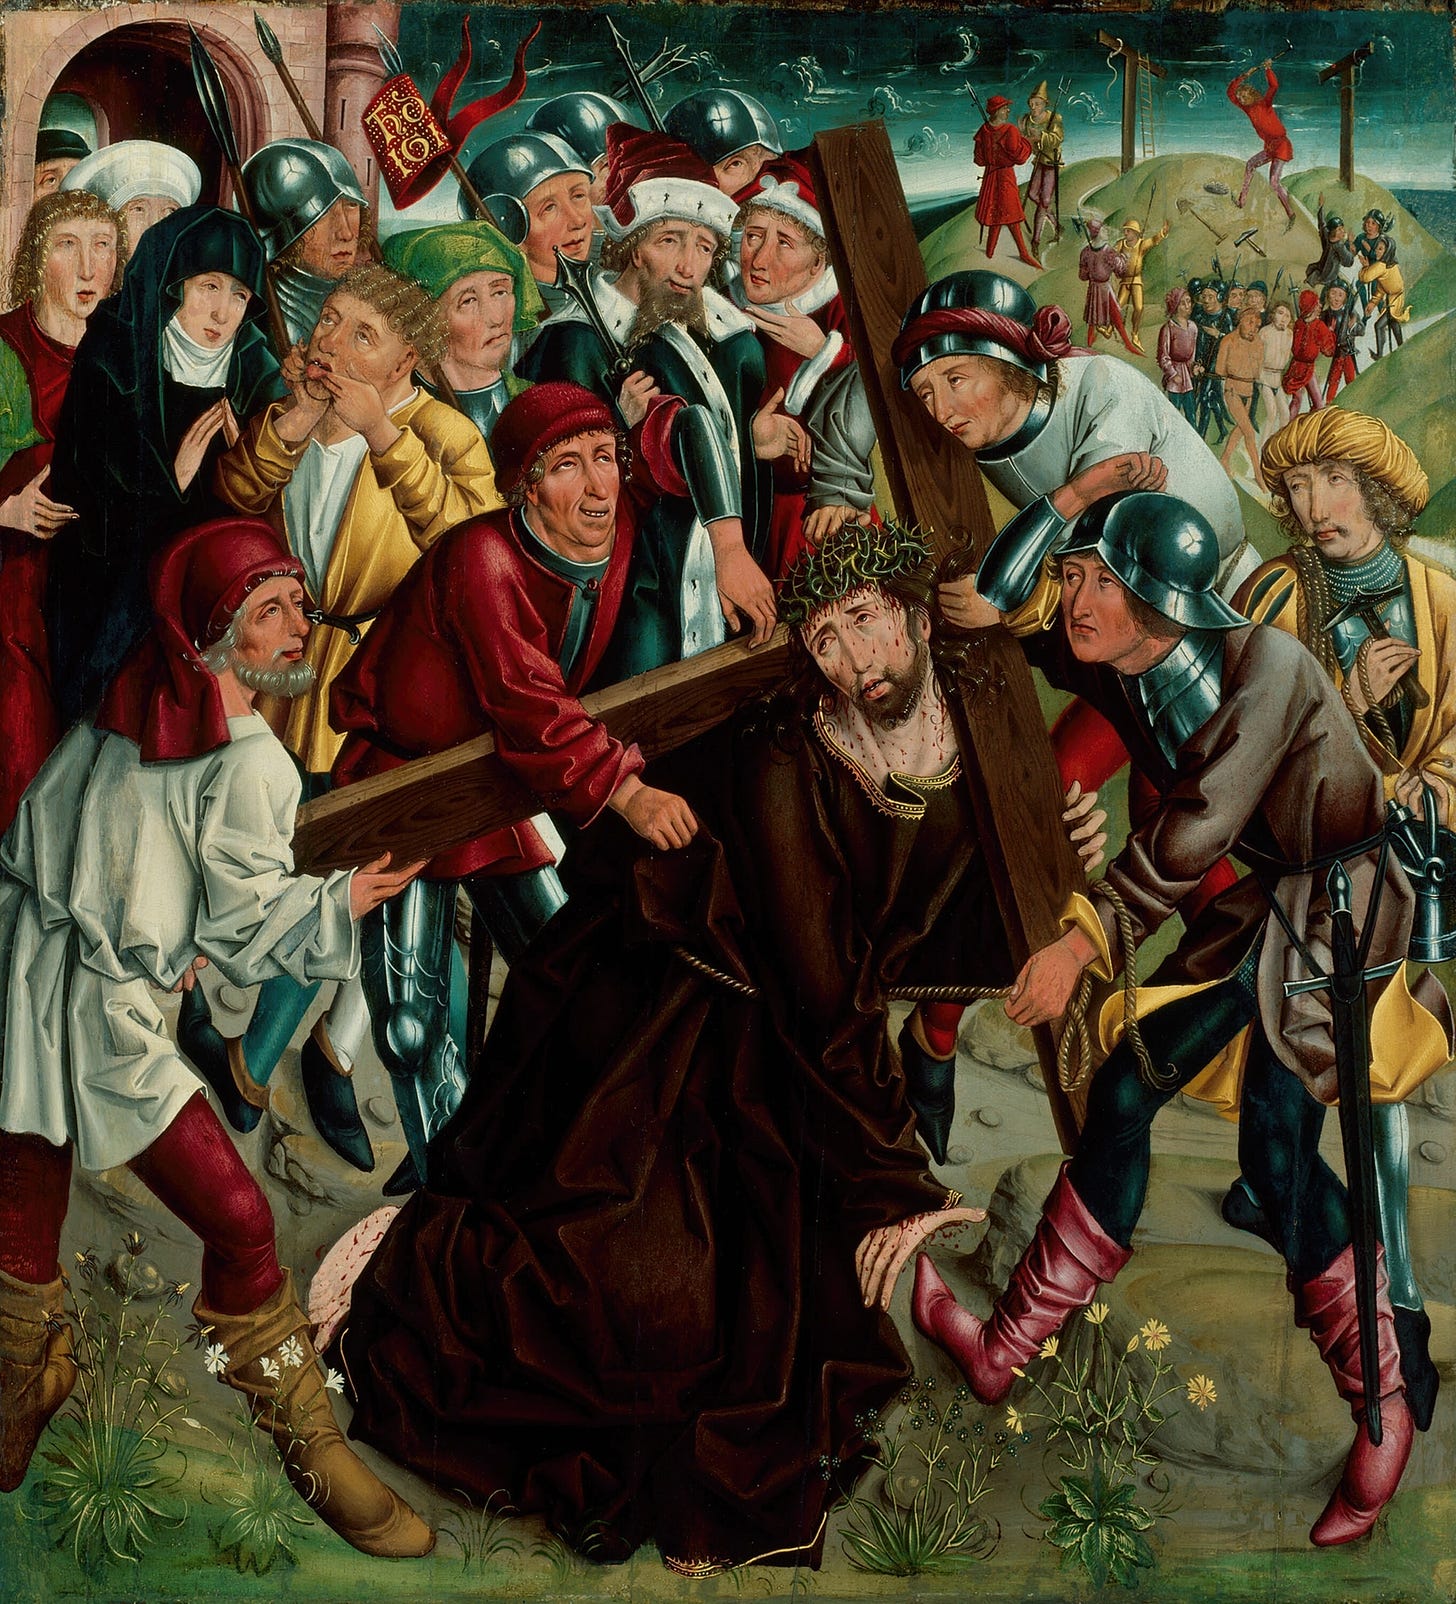 Christ Carrying the Cross (c. 1490) by Master of the Freising Visitation (German, active 1451-1490)